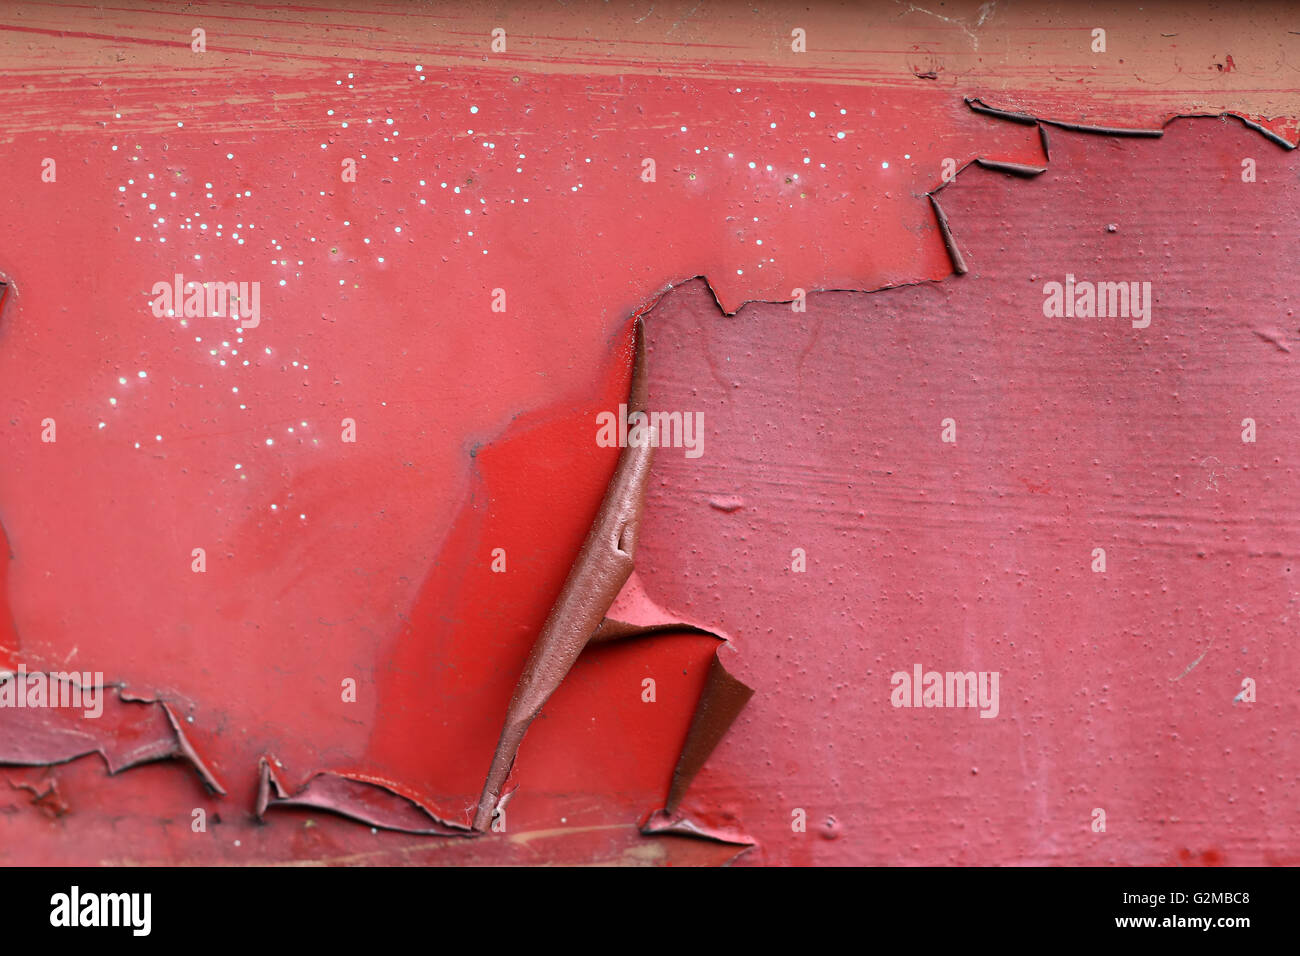 Flaking paint from the metal surface Stock Photo